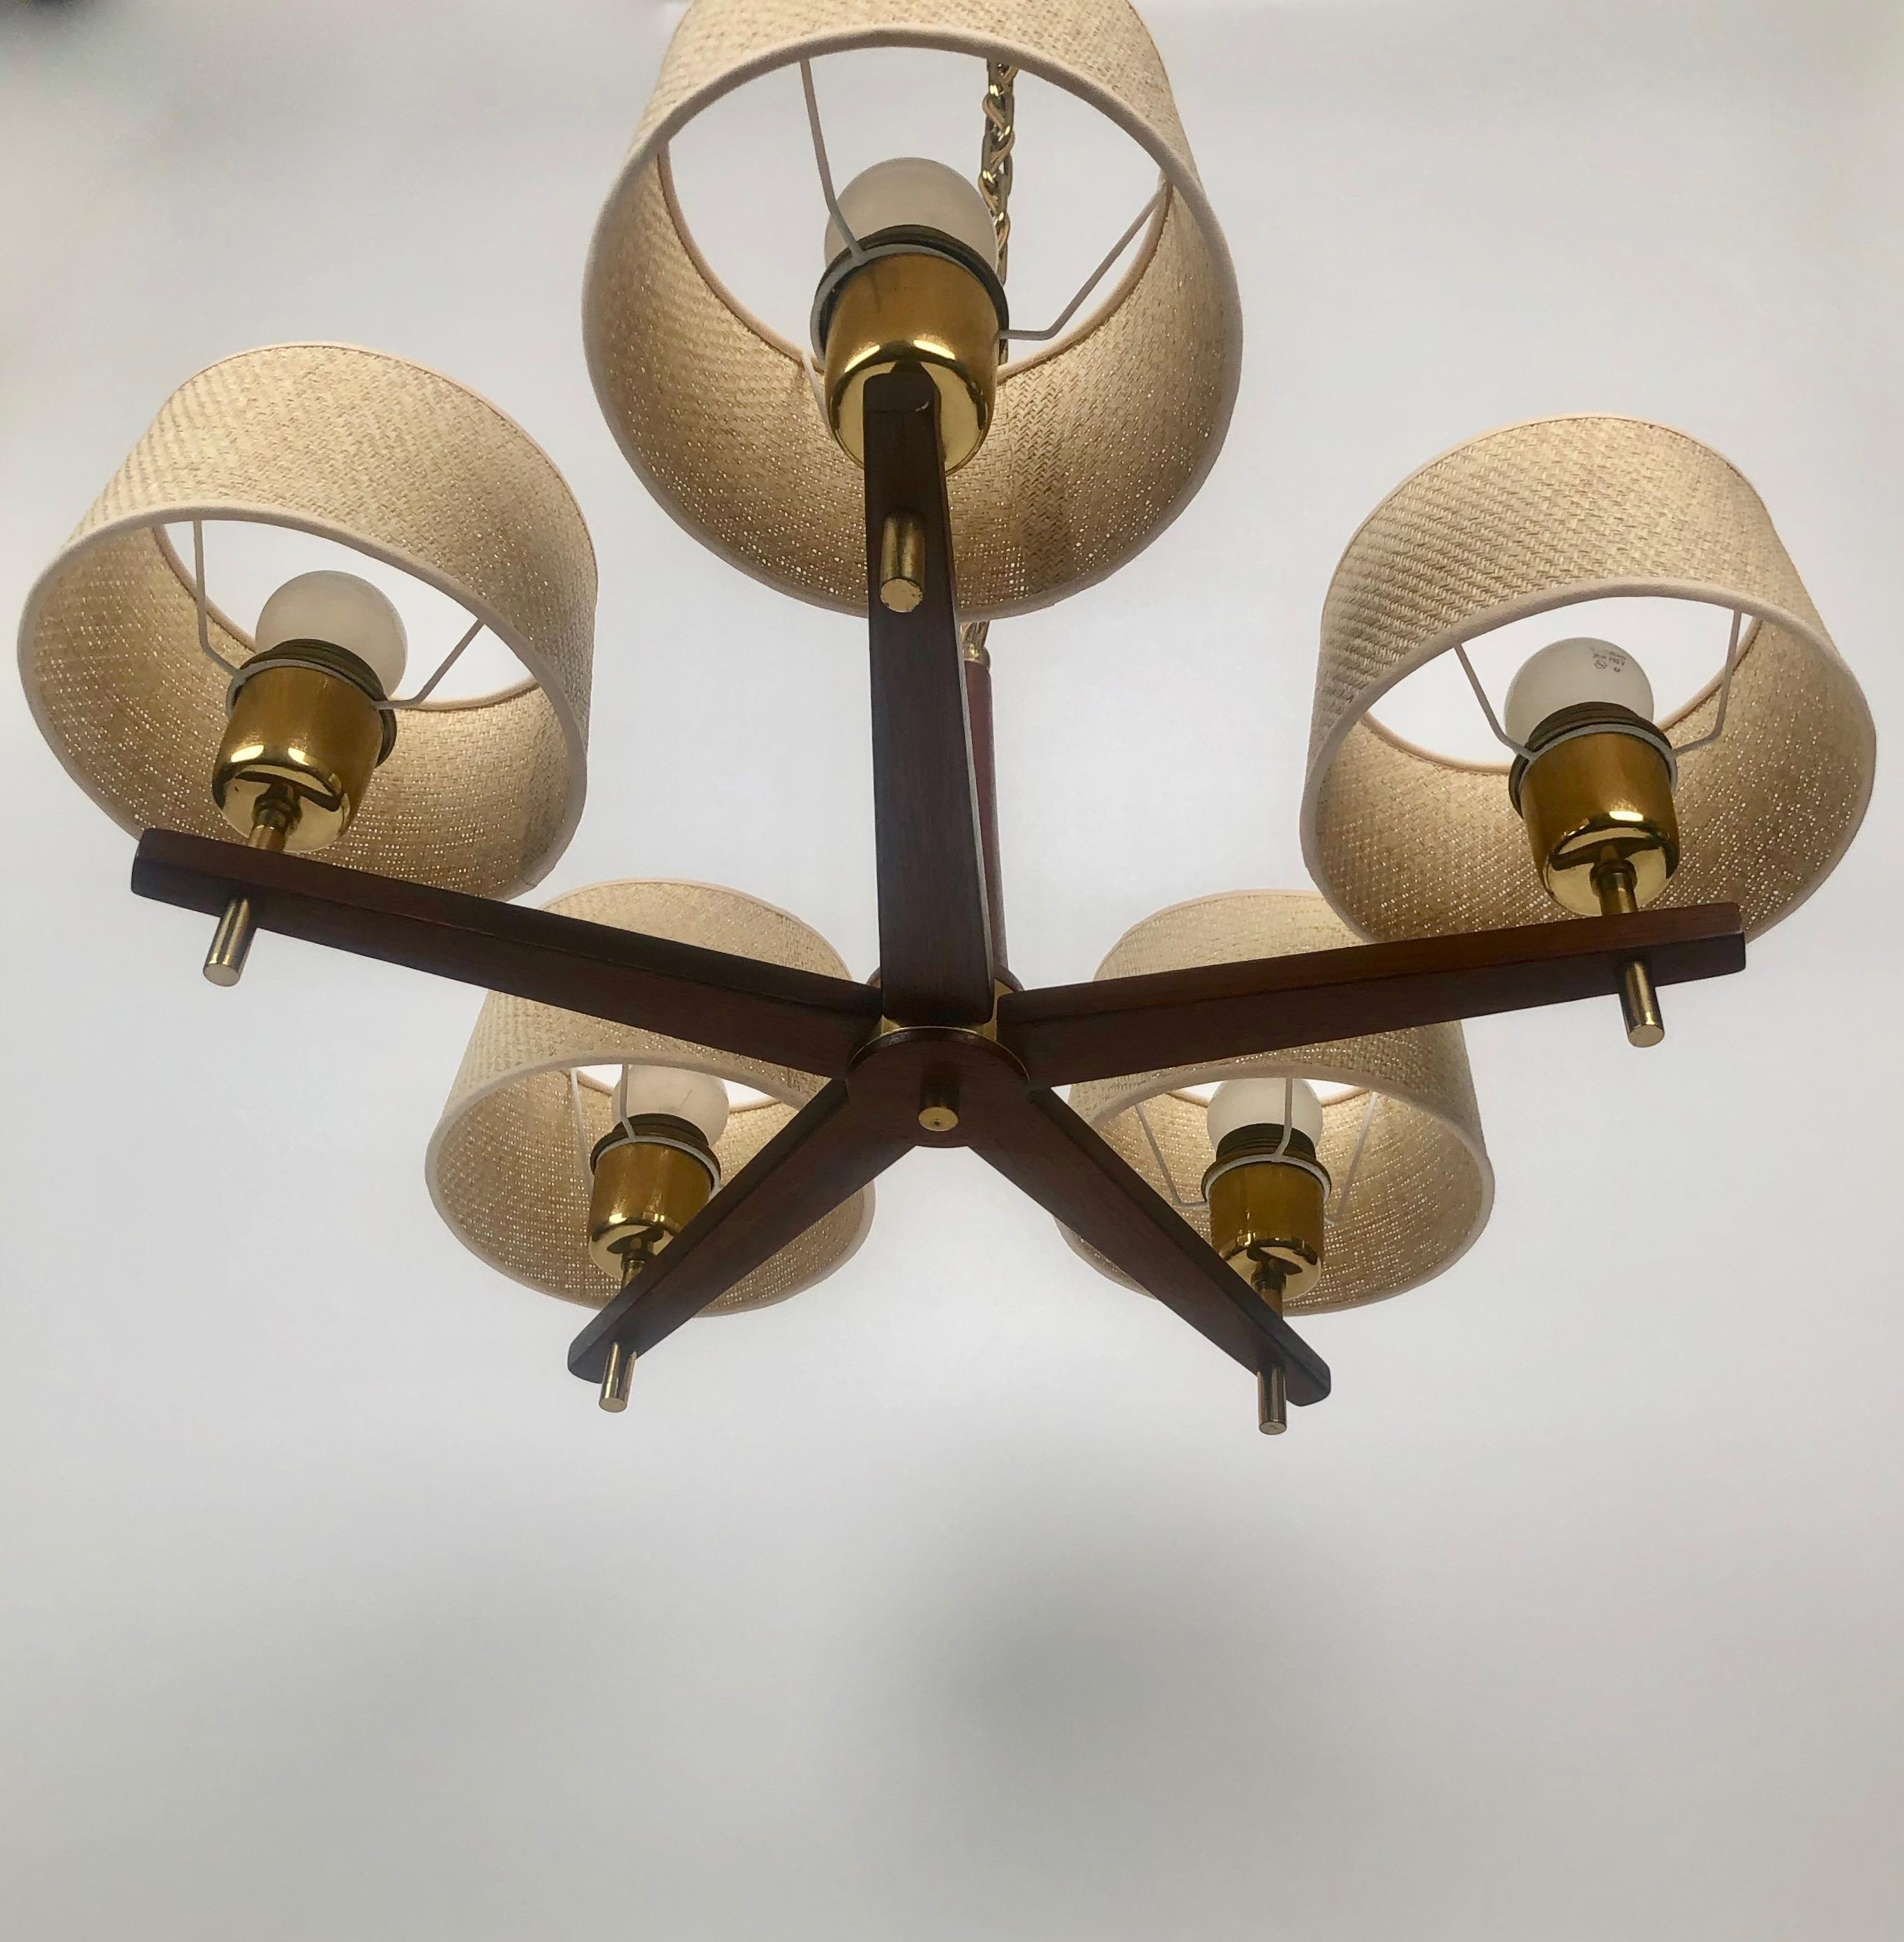 Austrian Five Arms Chandelier in Teak Wood and Brass with Cane Shades, 1960, Austria For Sale